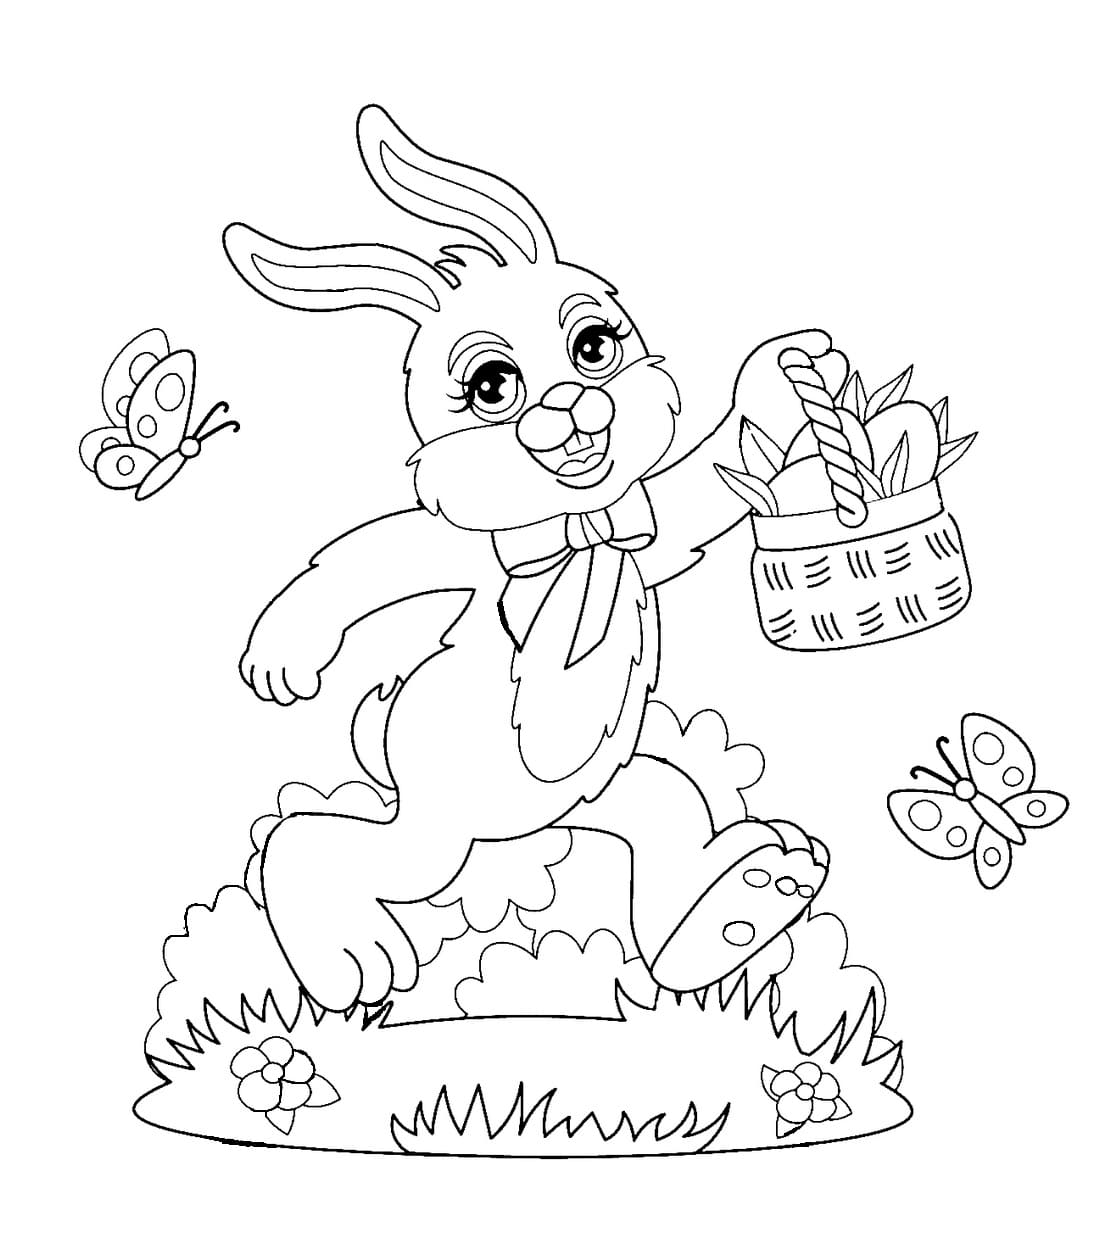 Easter Bunny Coloring Pages | Free Coloring Pages